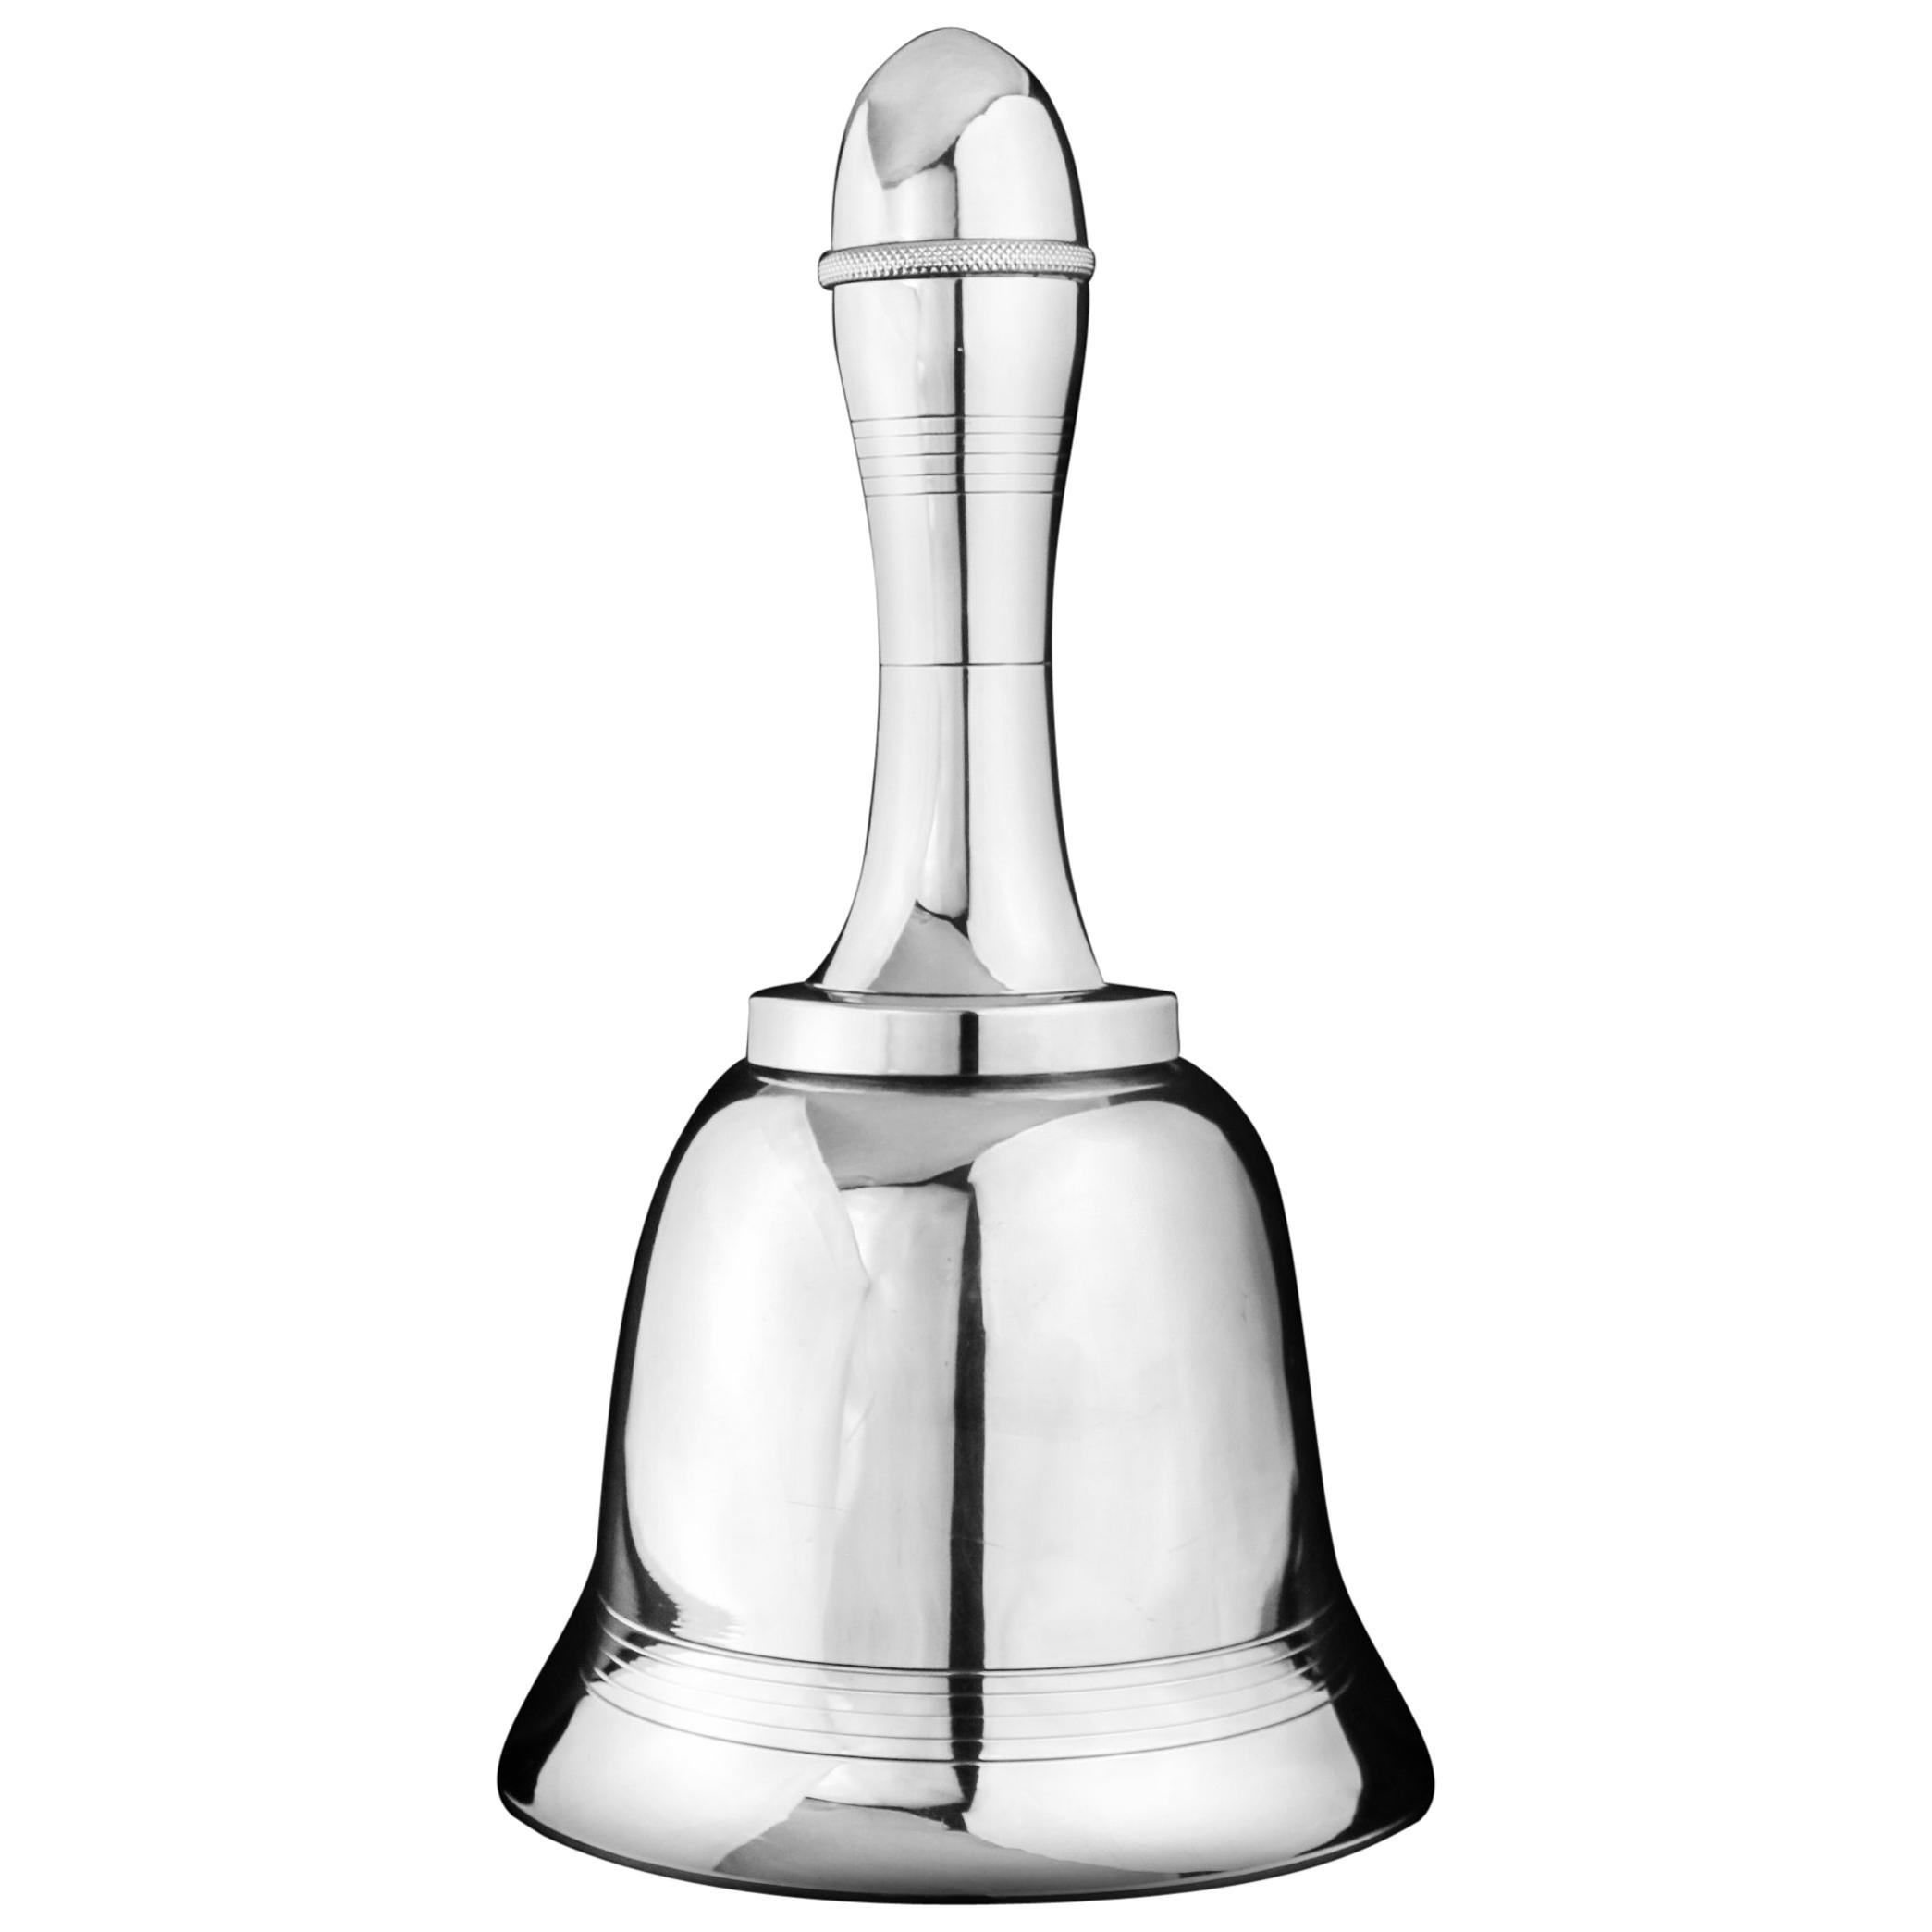 Vintage Asprey & Co. Silver-Plated 'Bell' Cocktail Shaker